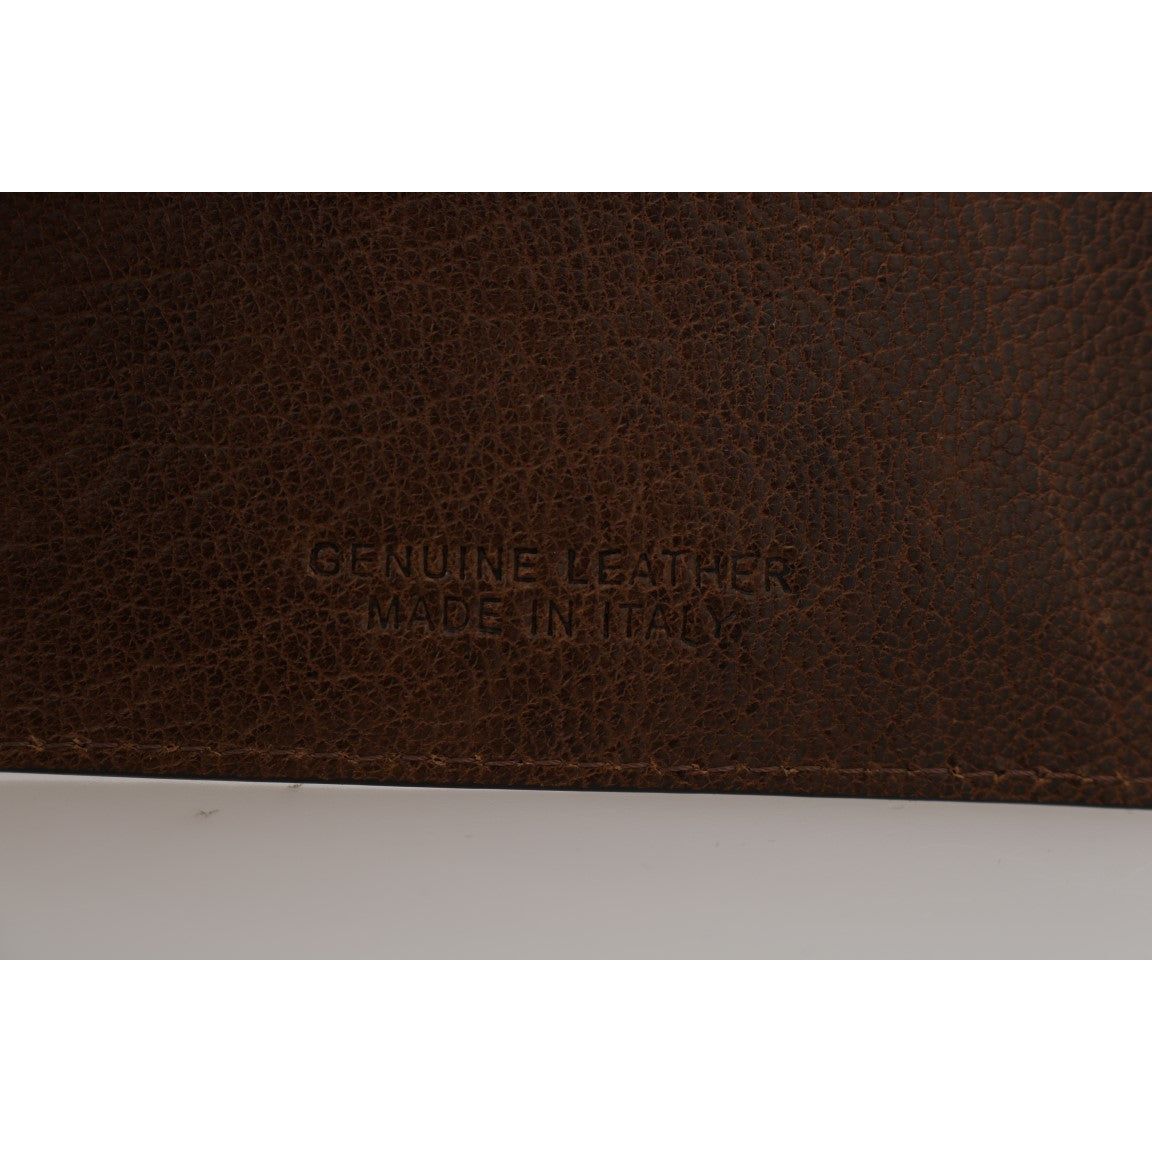 Billionaire Italian Couture Elegant Leather Men's Wallet in Brown brown-leather-cardholder-wallet Wallet 463442-brown-leather-cardholder-wallet-5.jpg